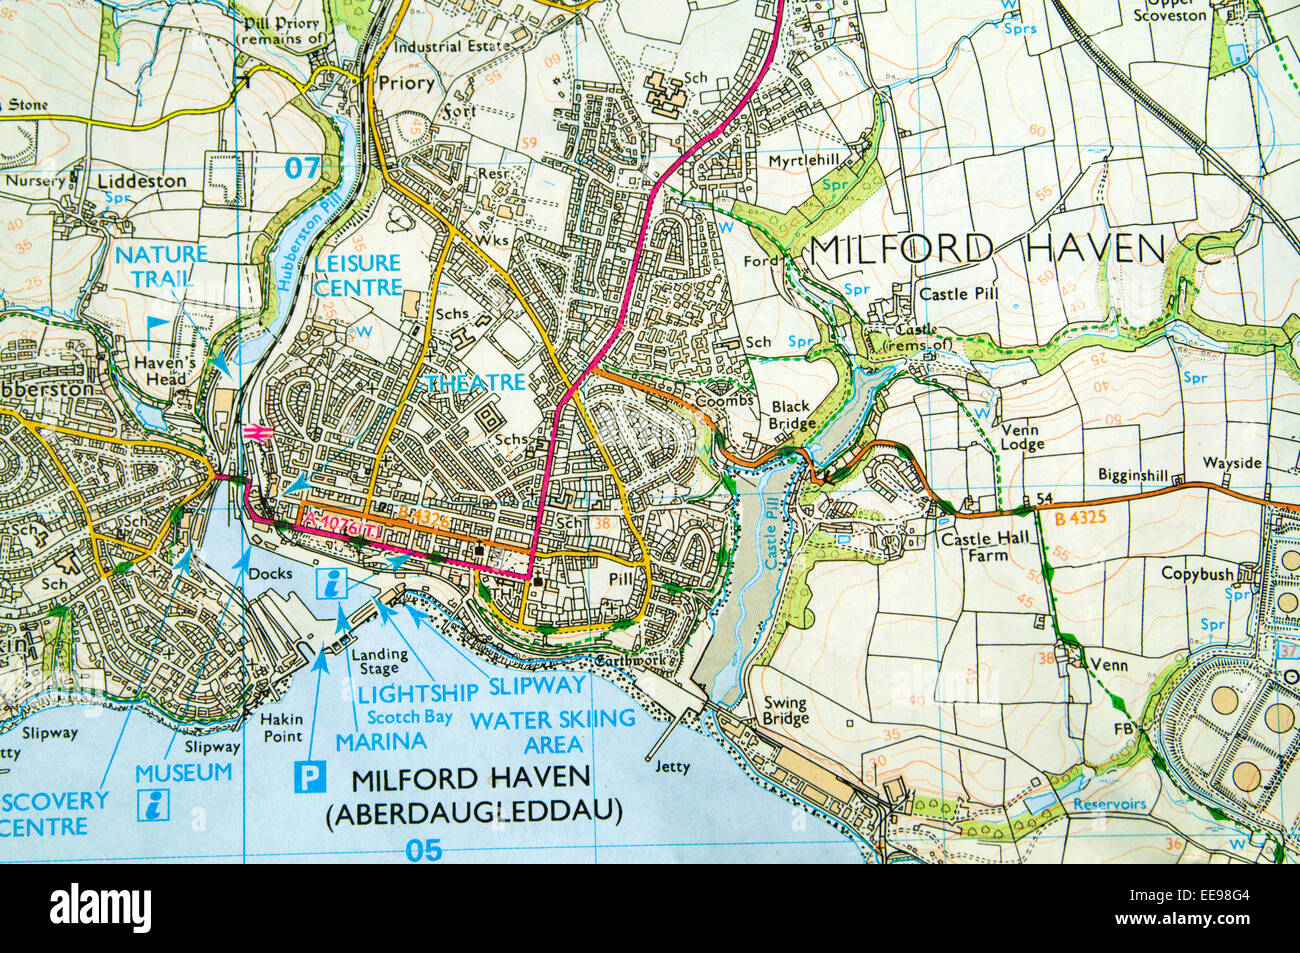 Ordnance Survey Map of  Milford Haven, Pembrokeshire, West Wales. Stock Photo